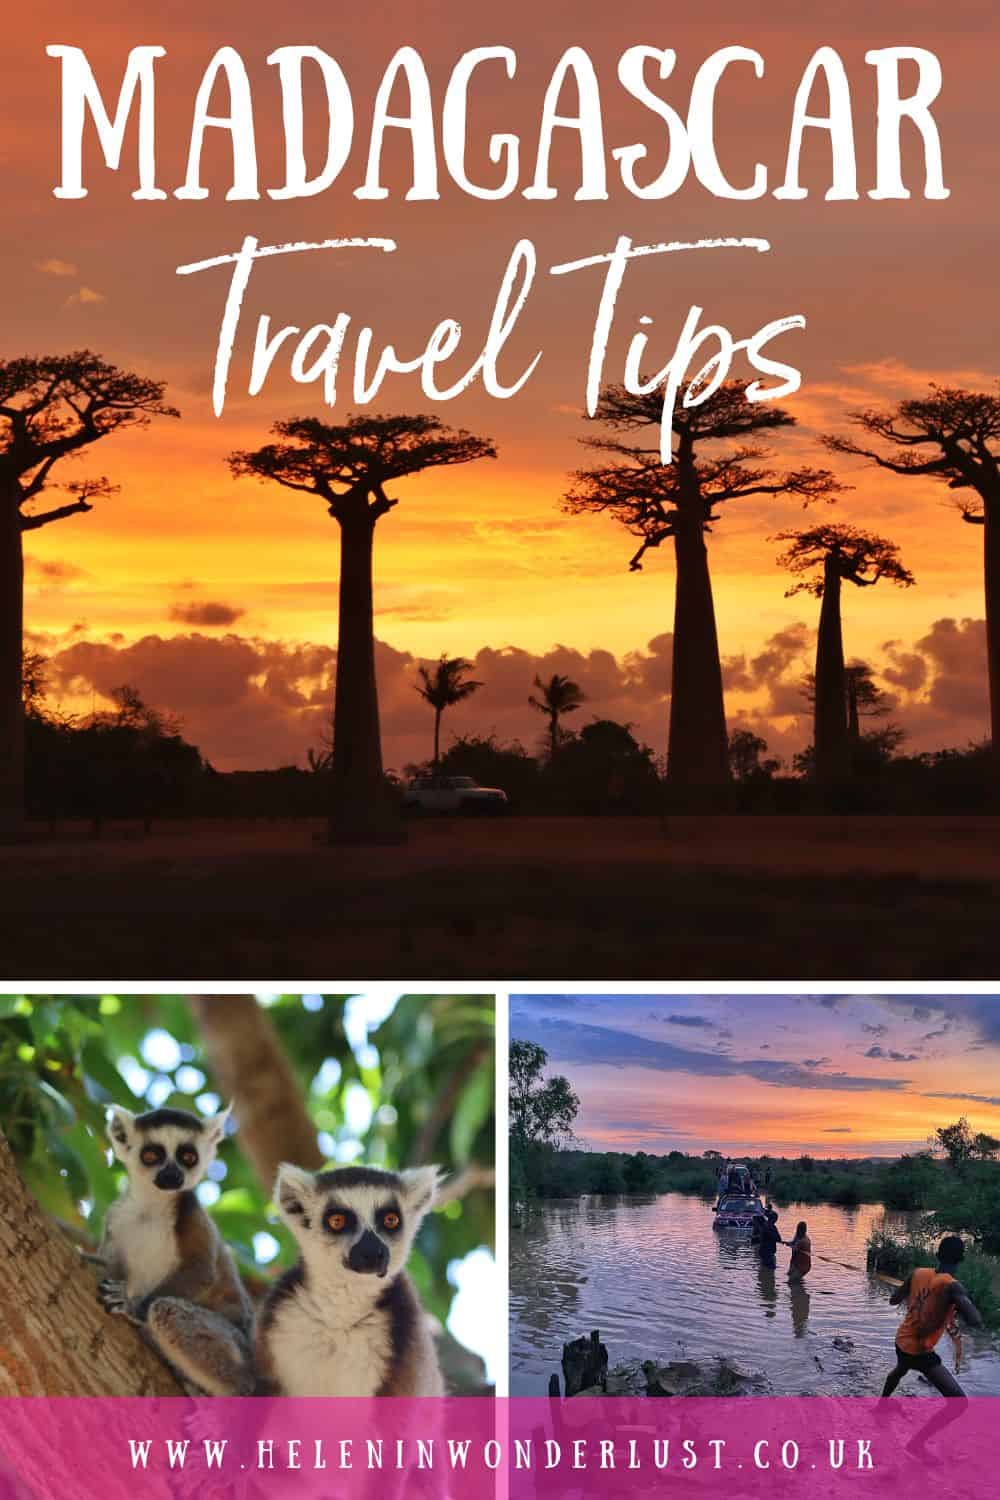 Madagascar Travel Tips - Essential Things to Know Before You Travel to Madagascar